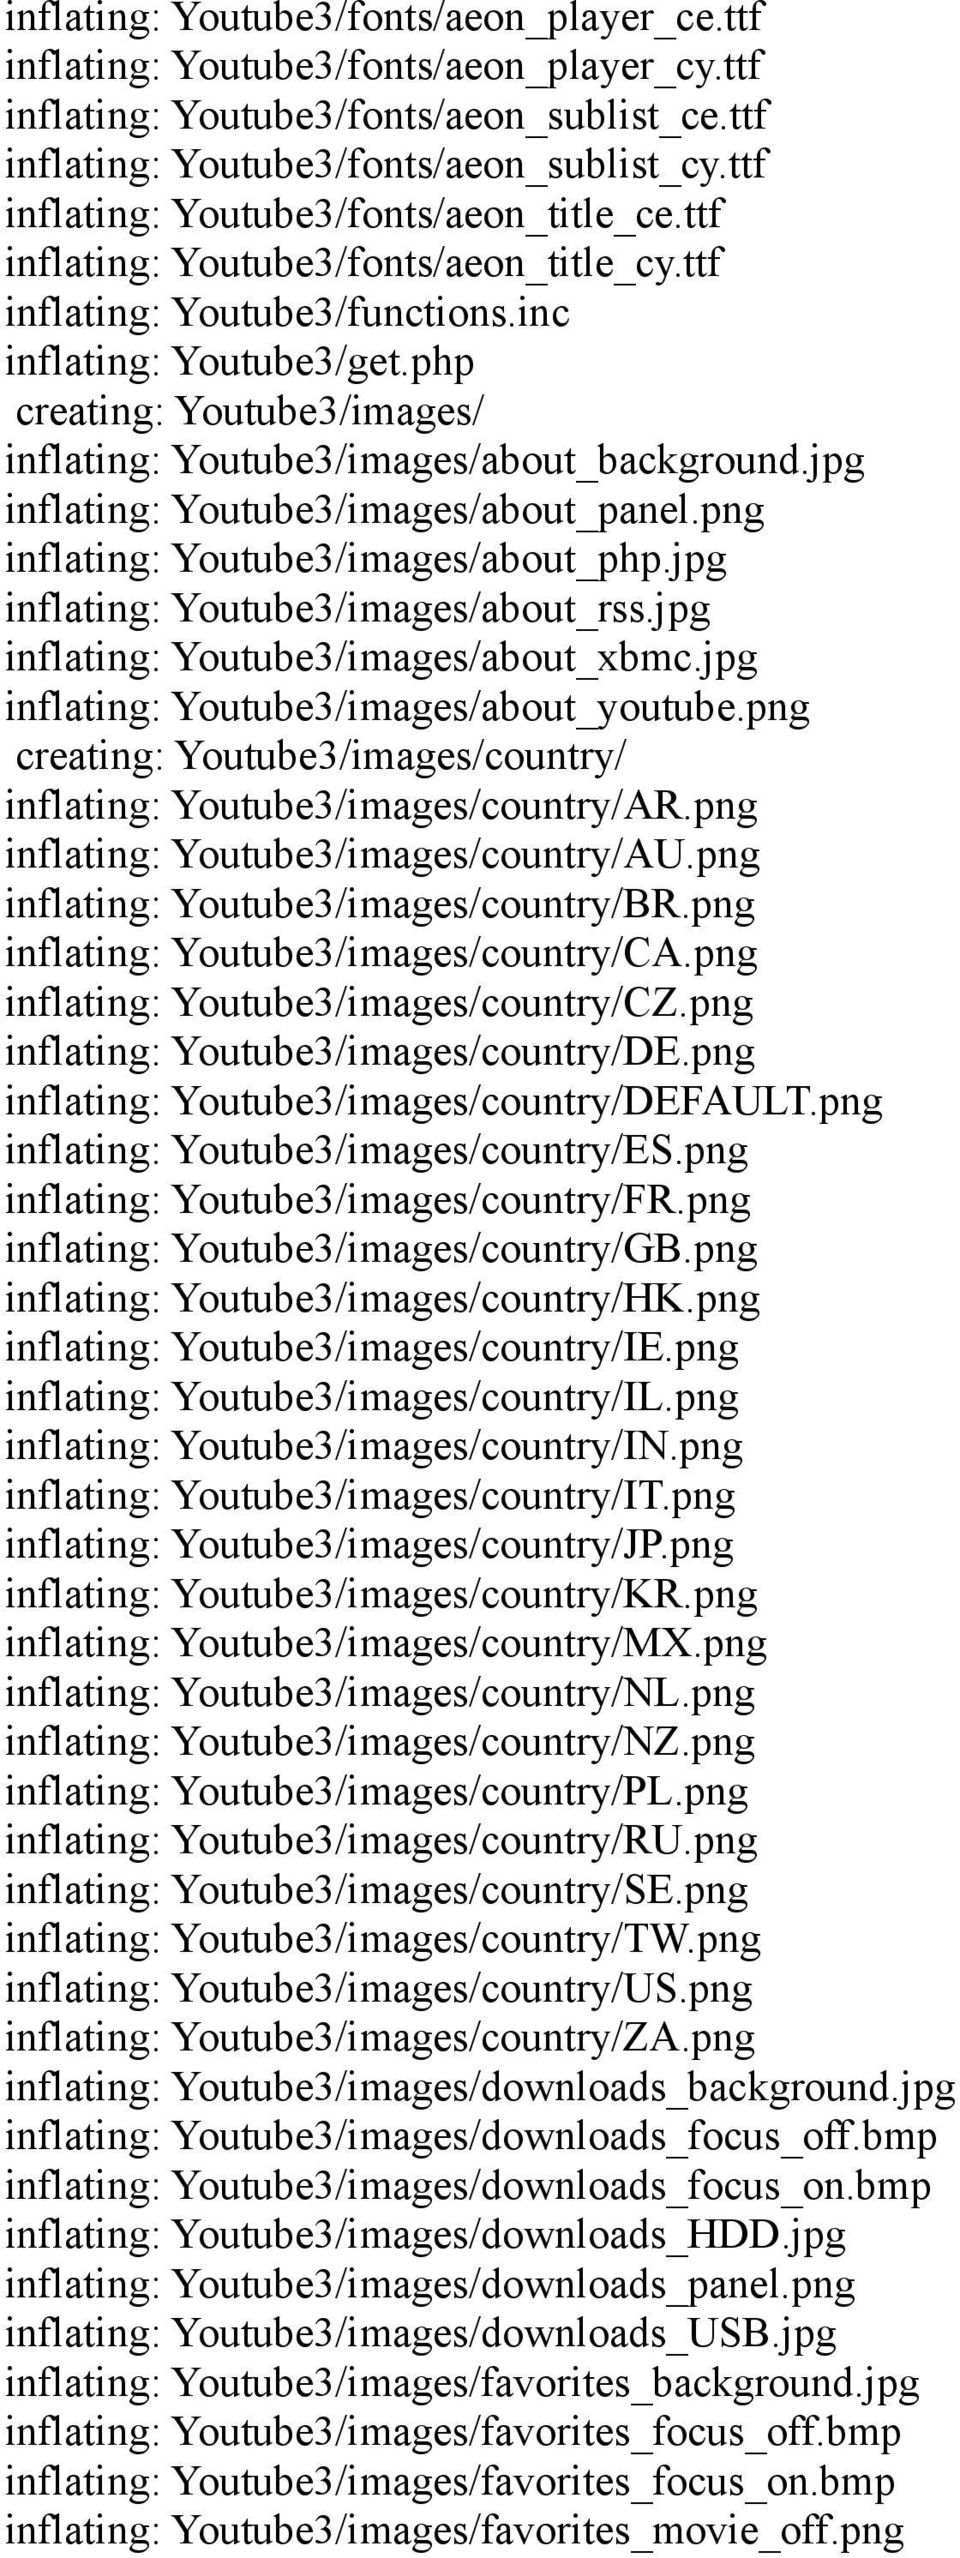 php creating: Youtube3/images/ inflating: Youtube3/images/about_background.jpg inflating: Youtube3/images/about_panel.png inflating: Youtube3/images/about_php.jpg inflating: Youtube3/images/about_rss.